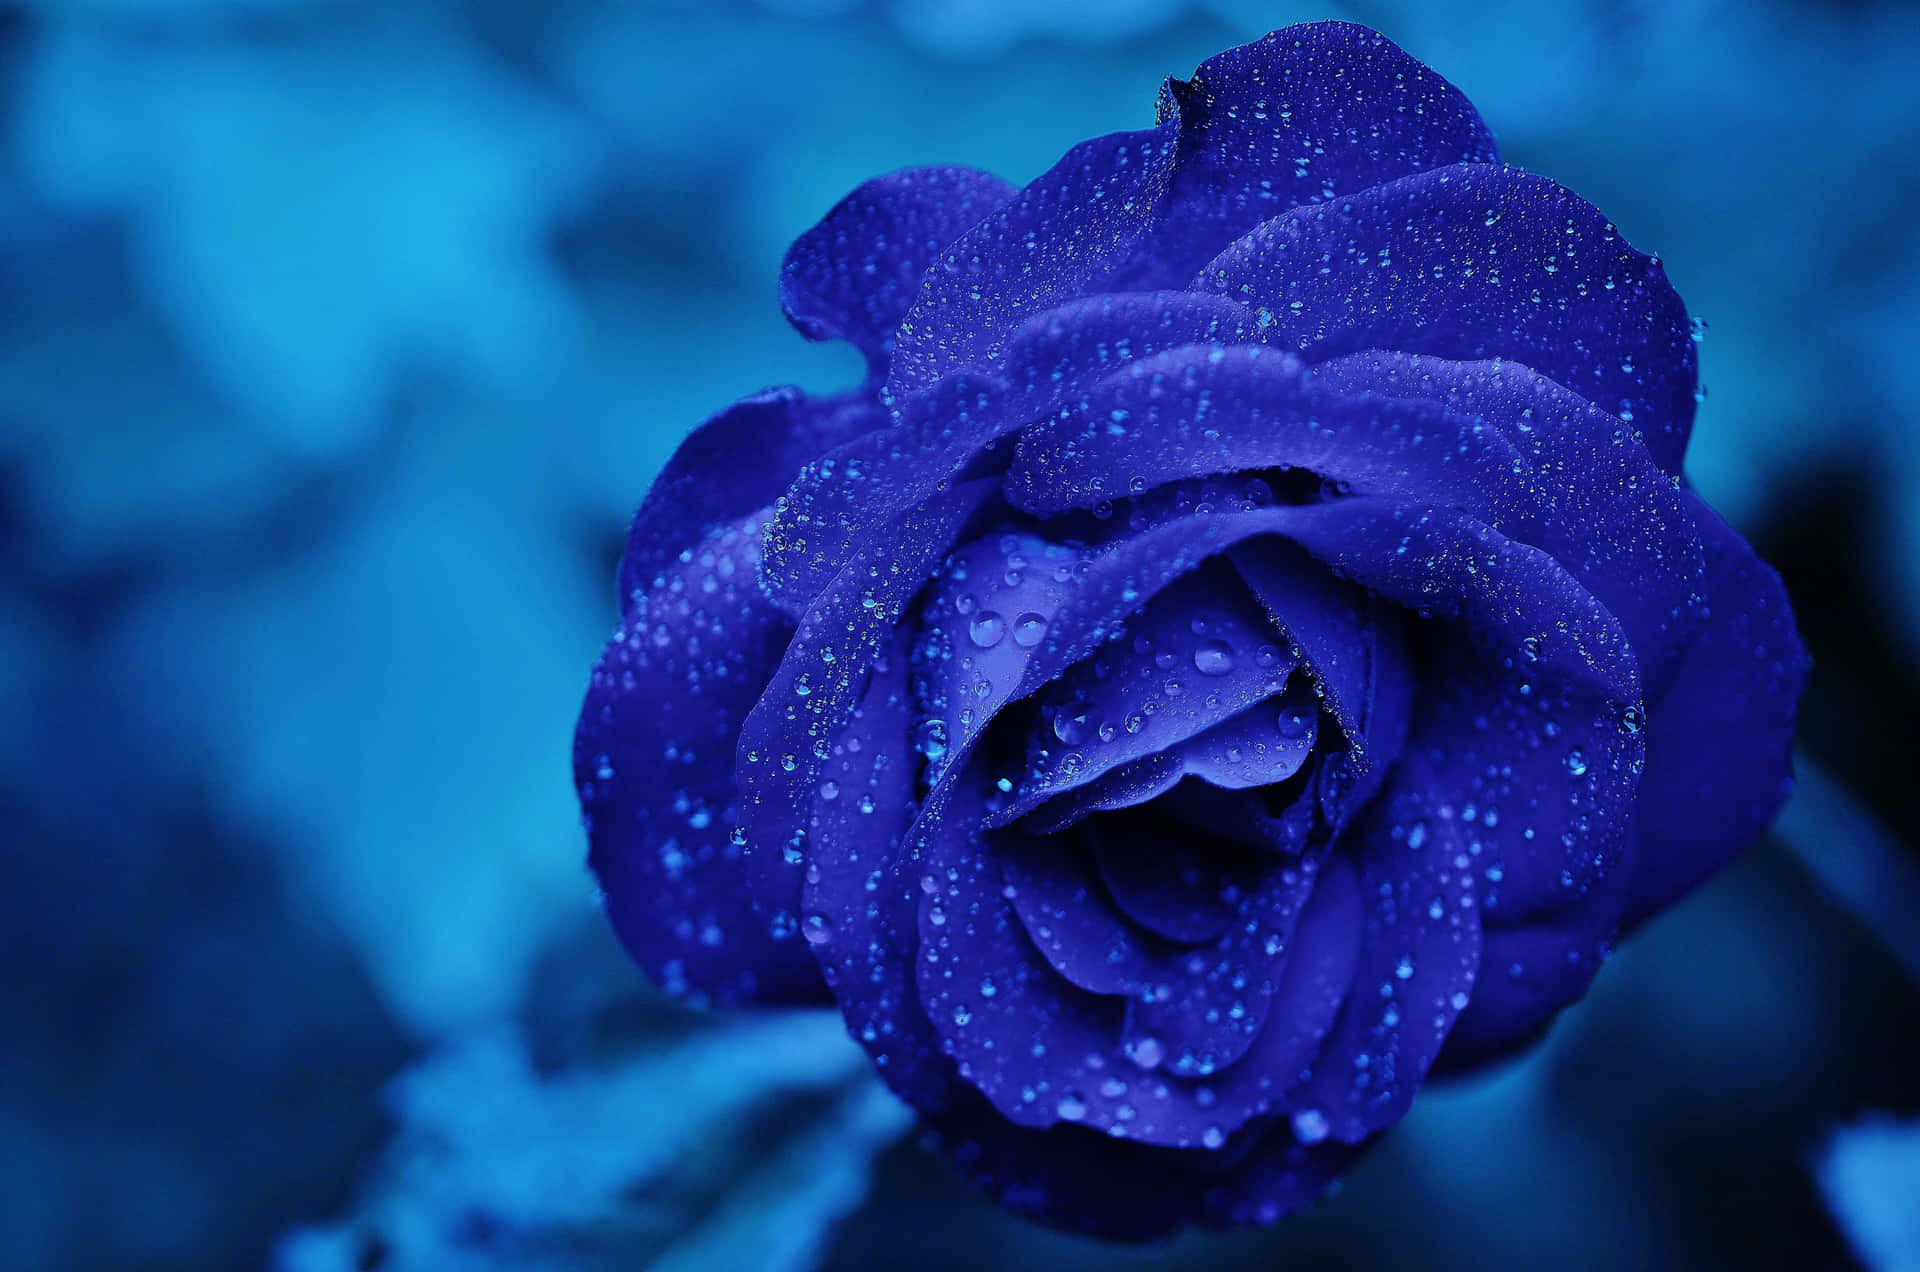 Feeling Blue? This Blue Rose Is Perfect For Any Occasion